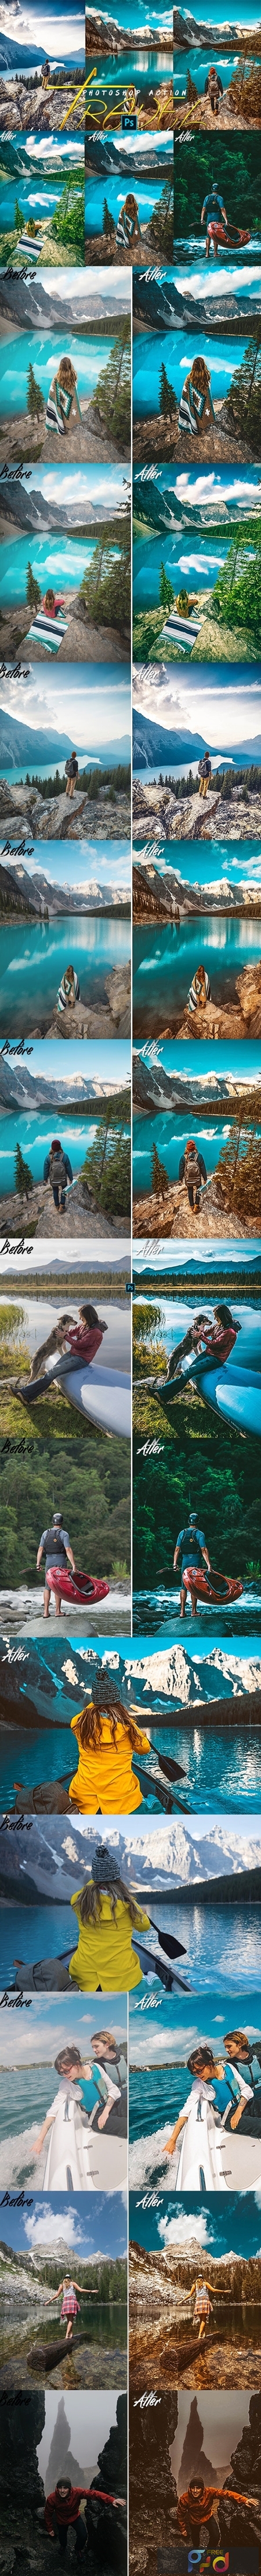 Travels Photoshop Actions 25147175 1